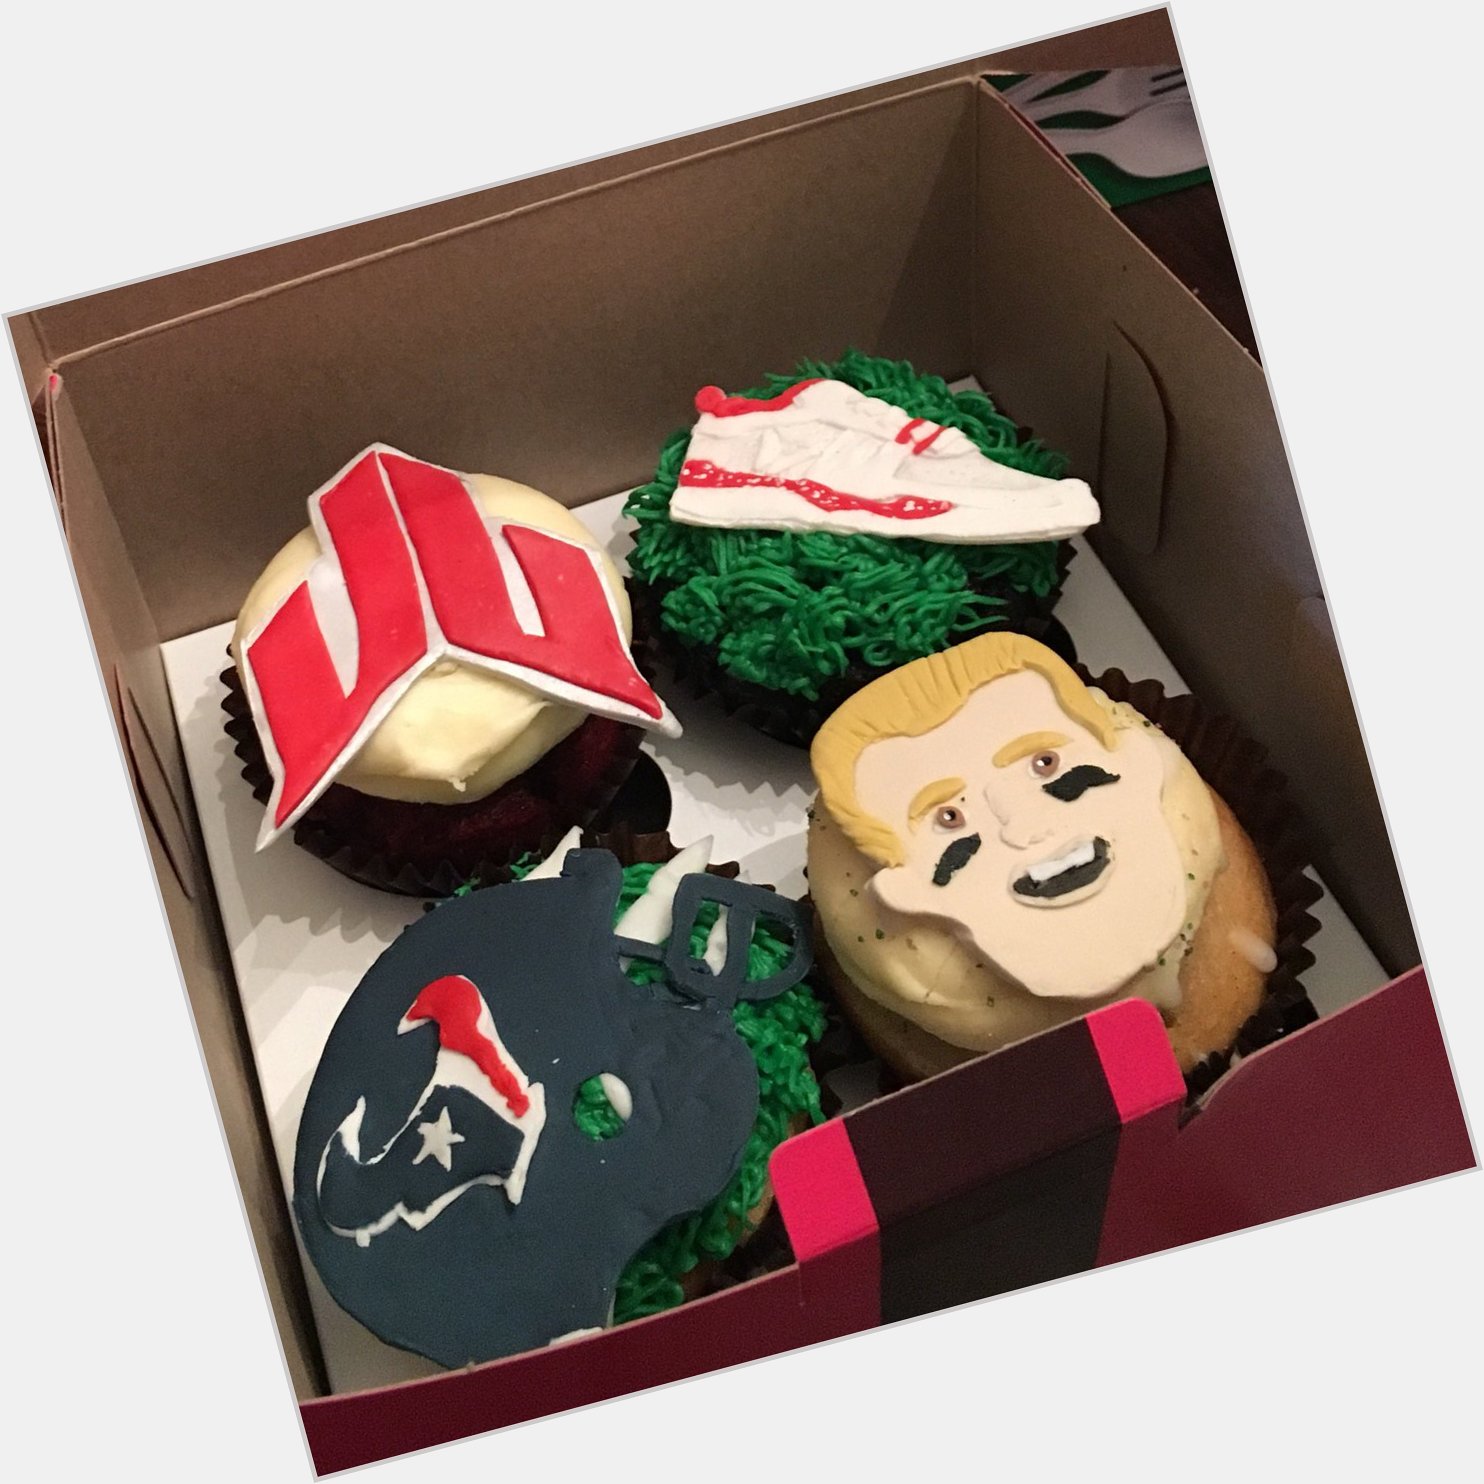 Happy 28th Birthday to Here are some JJ Watt themed cupcakes I made for your special day 